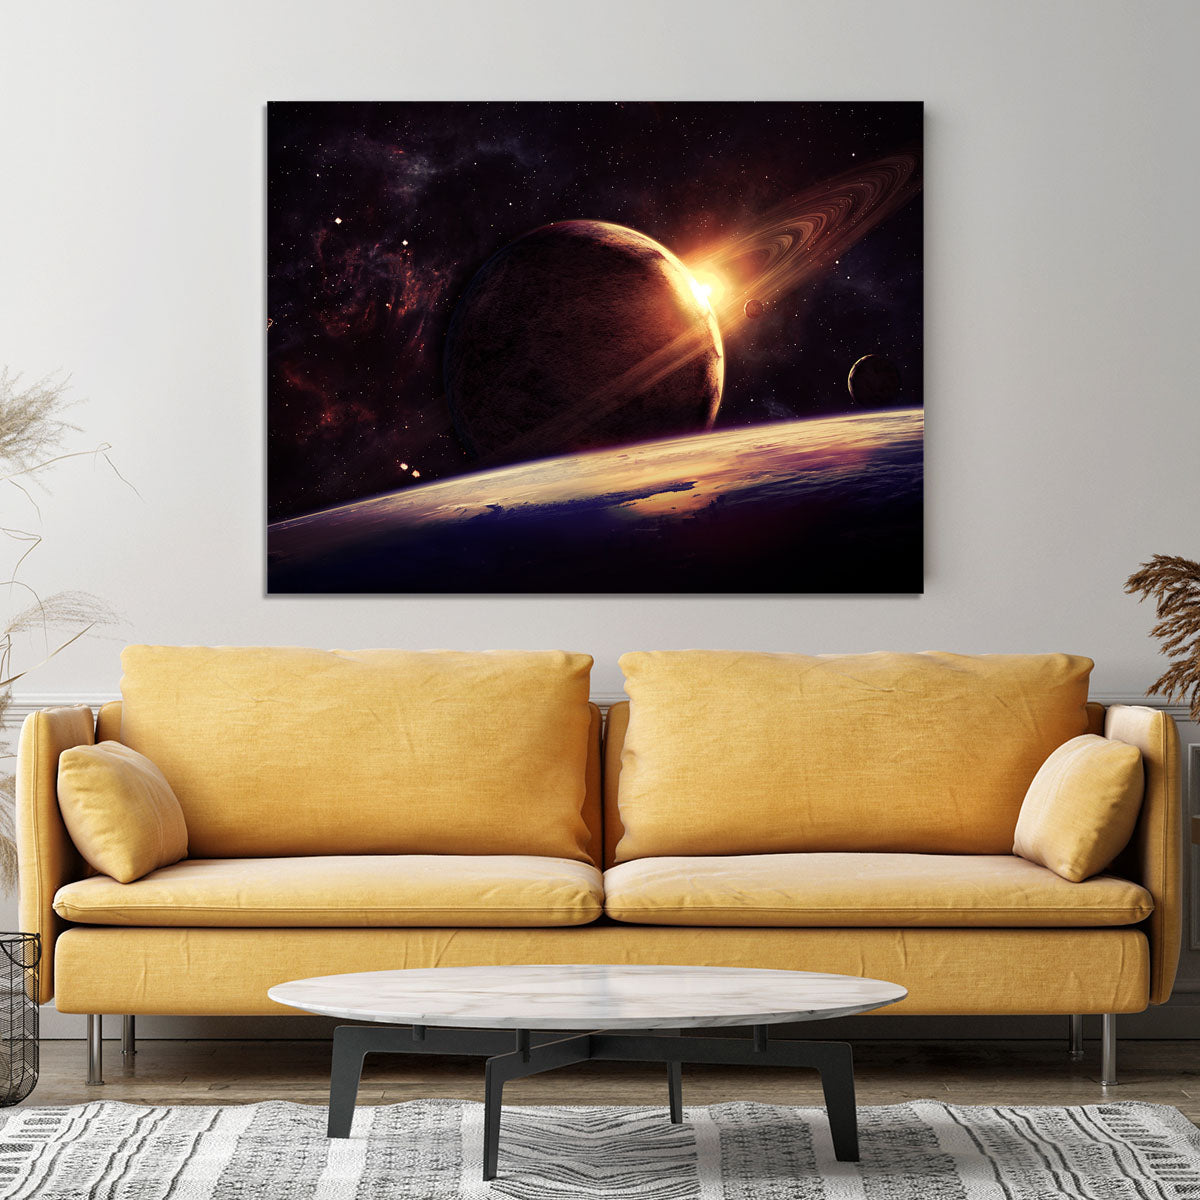 Planets over the nebulae in space Canvas Print or Poster - Canvas Art Rocks - 4